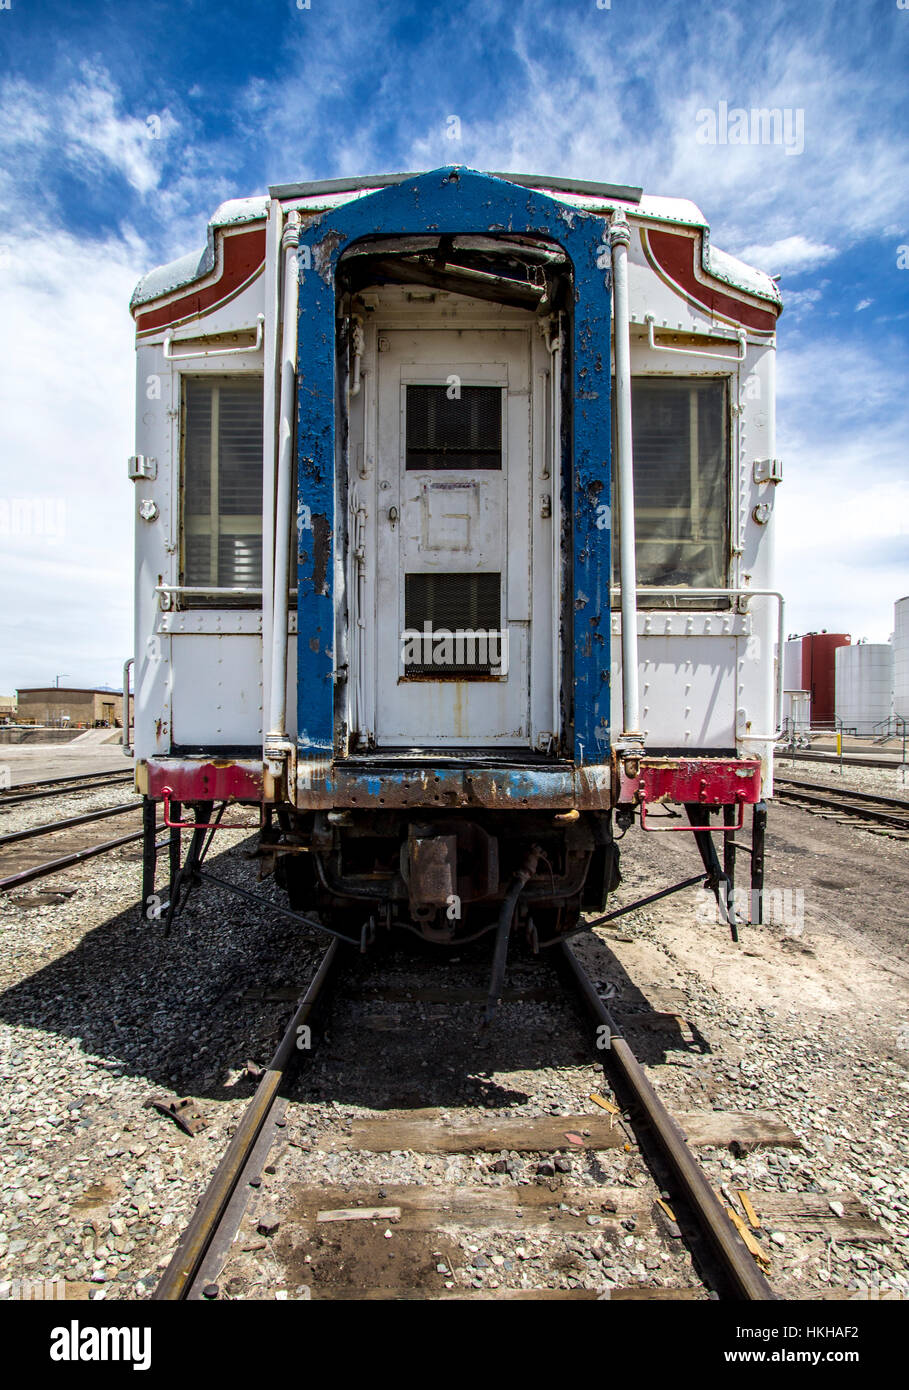 Series of incredibly beautiful, abandoned, rustic trains. Stock Photo